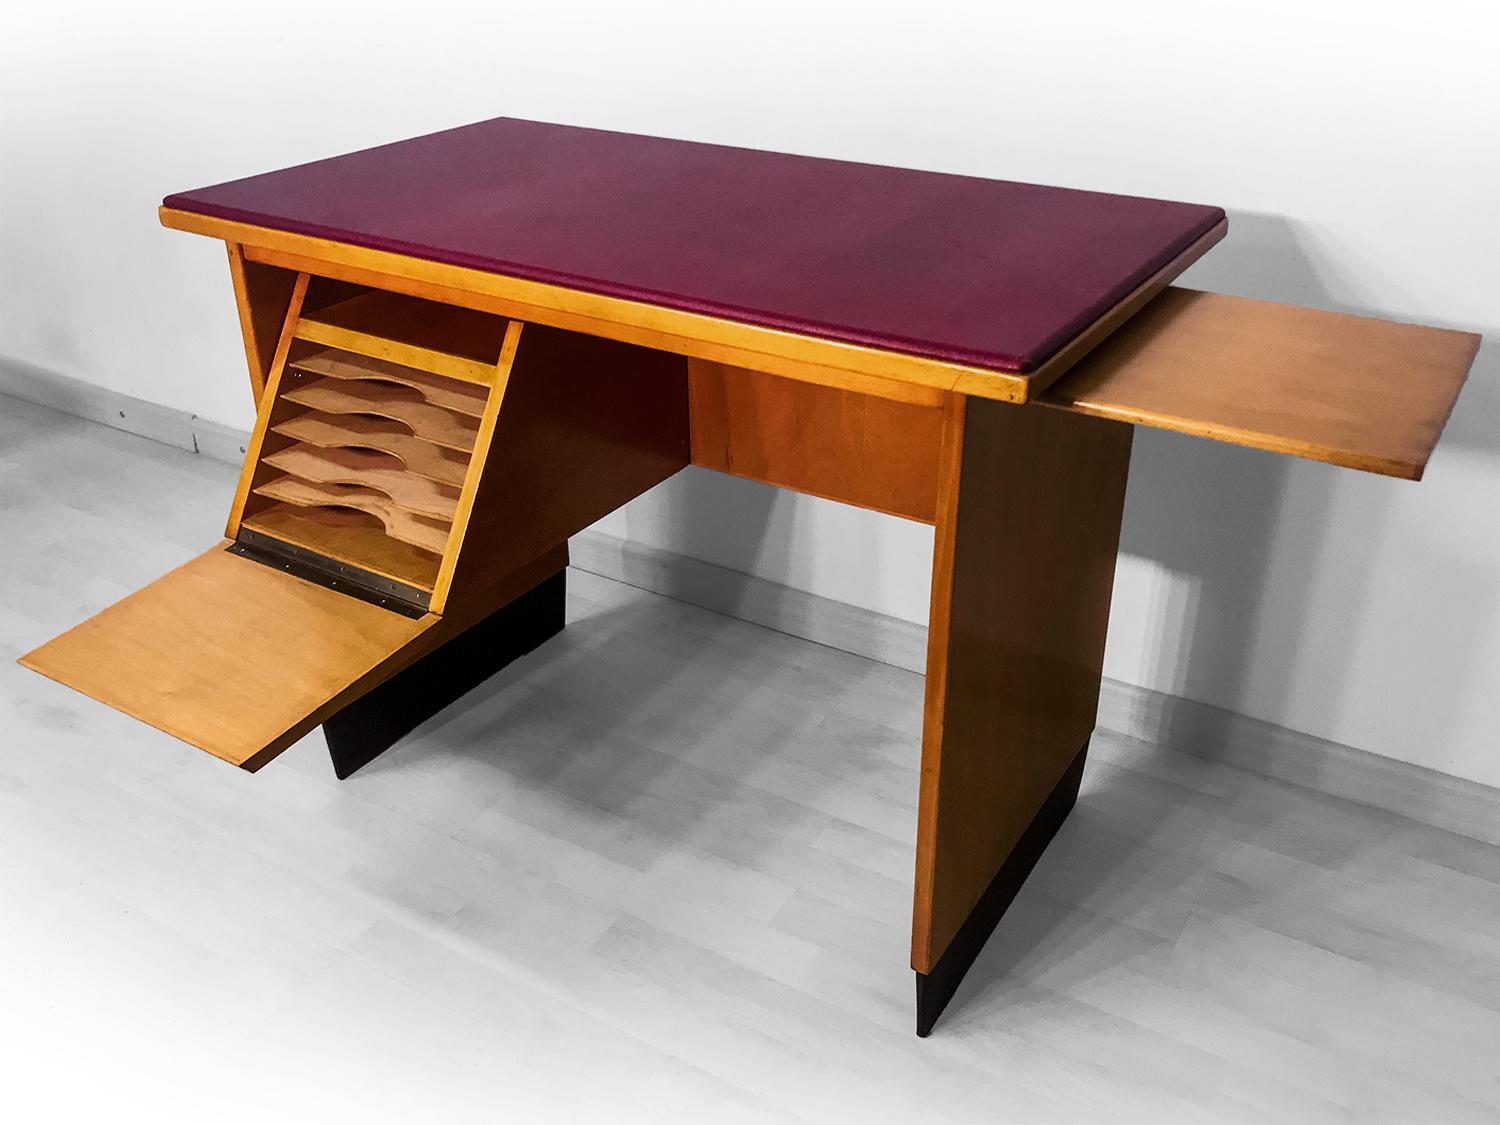 This Italian stunning and unusual writing desk has been well designed by Antonio Gorgone in the 1950s.
It has a very solid structure and its small size makes it easily adaptable to any room of the home as well or the office.
It's a real unique